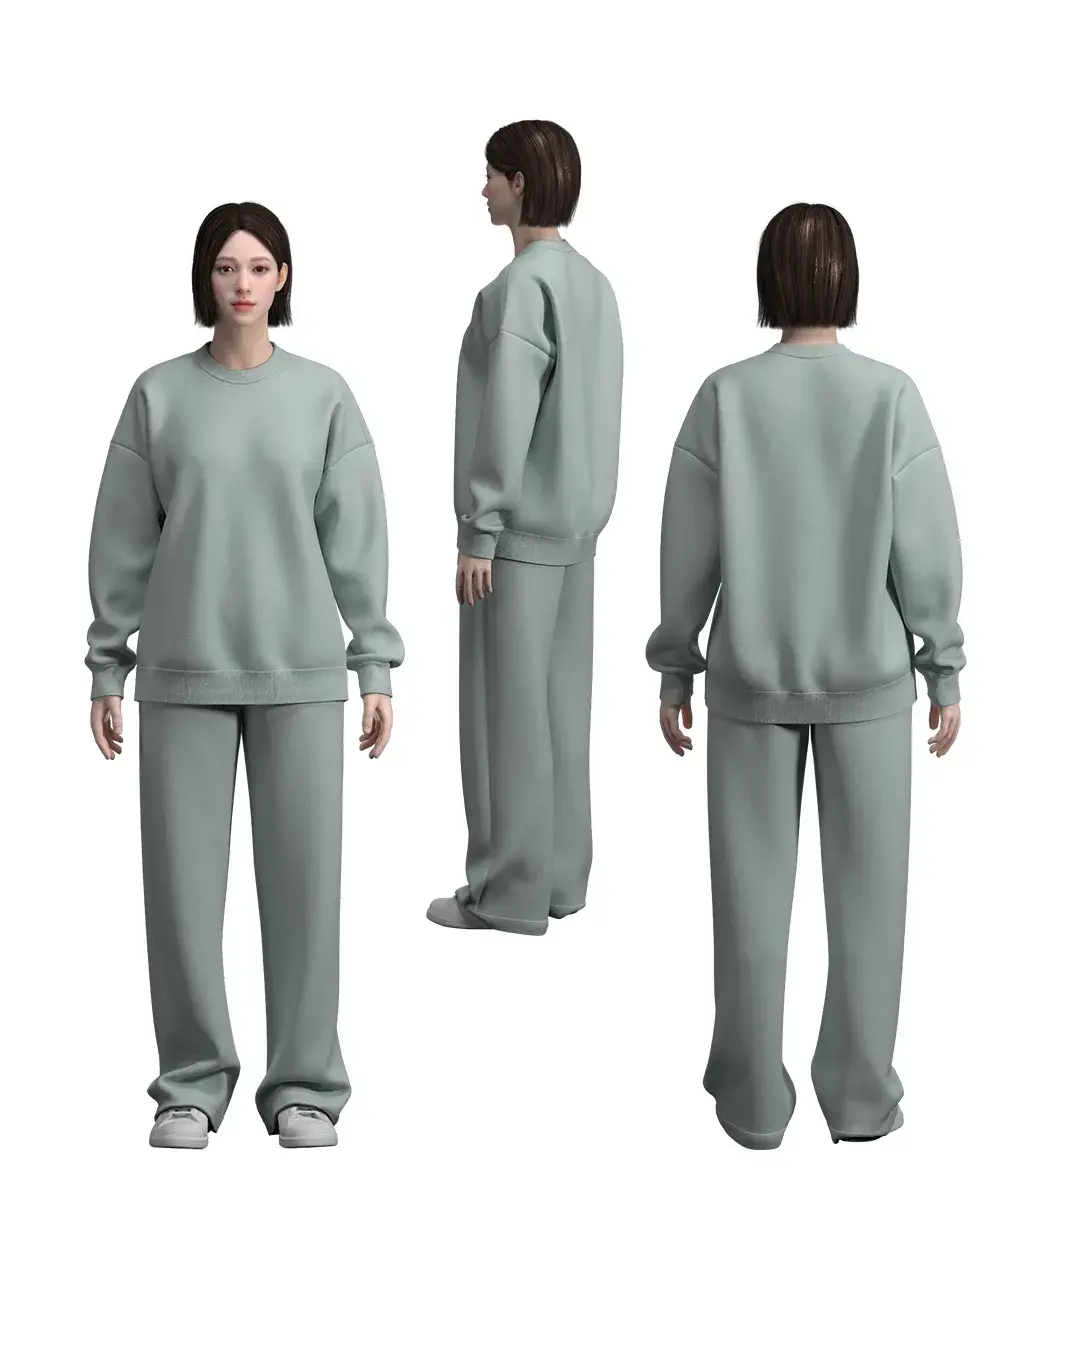 Straight-Cut Sweatshirt Suit and Straight Pants with Side Pockets